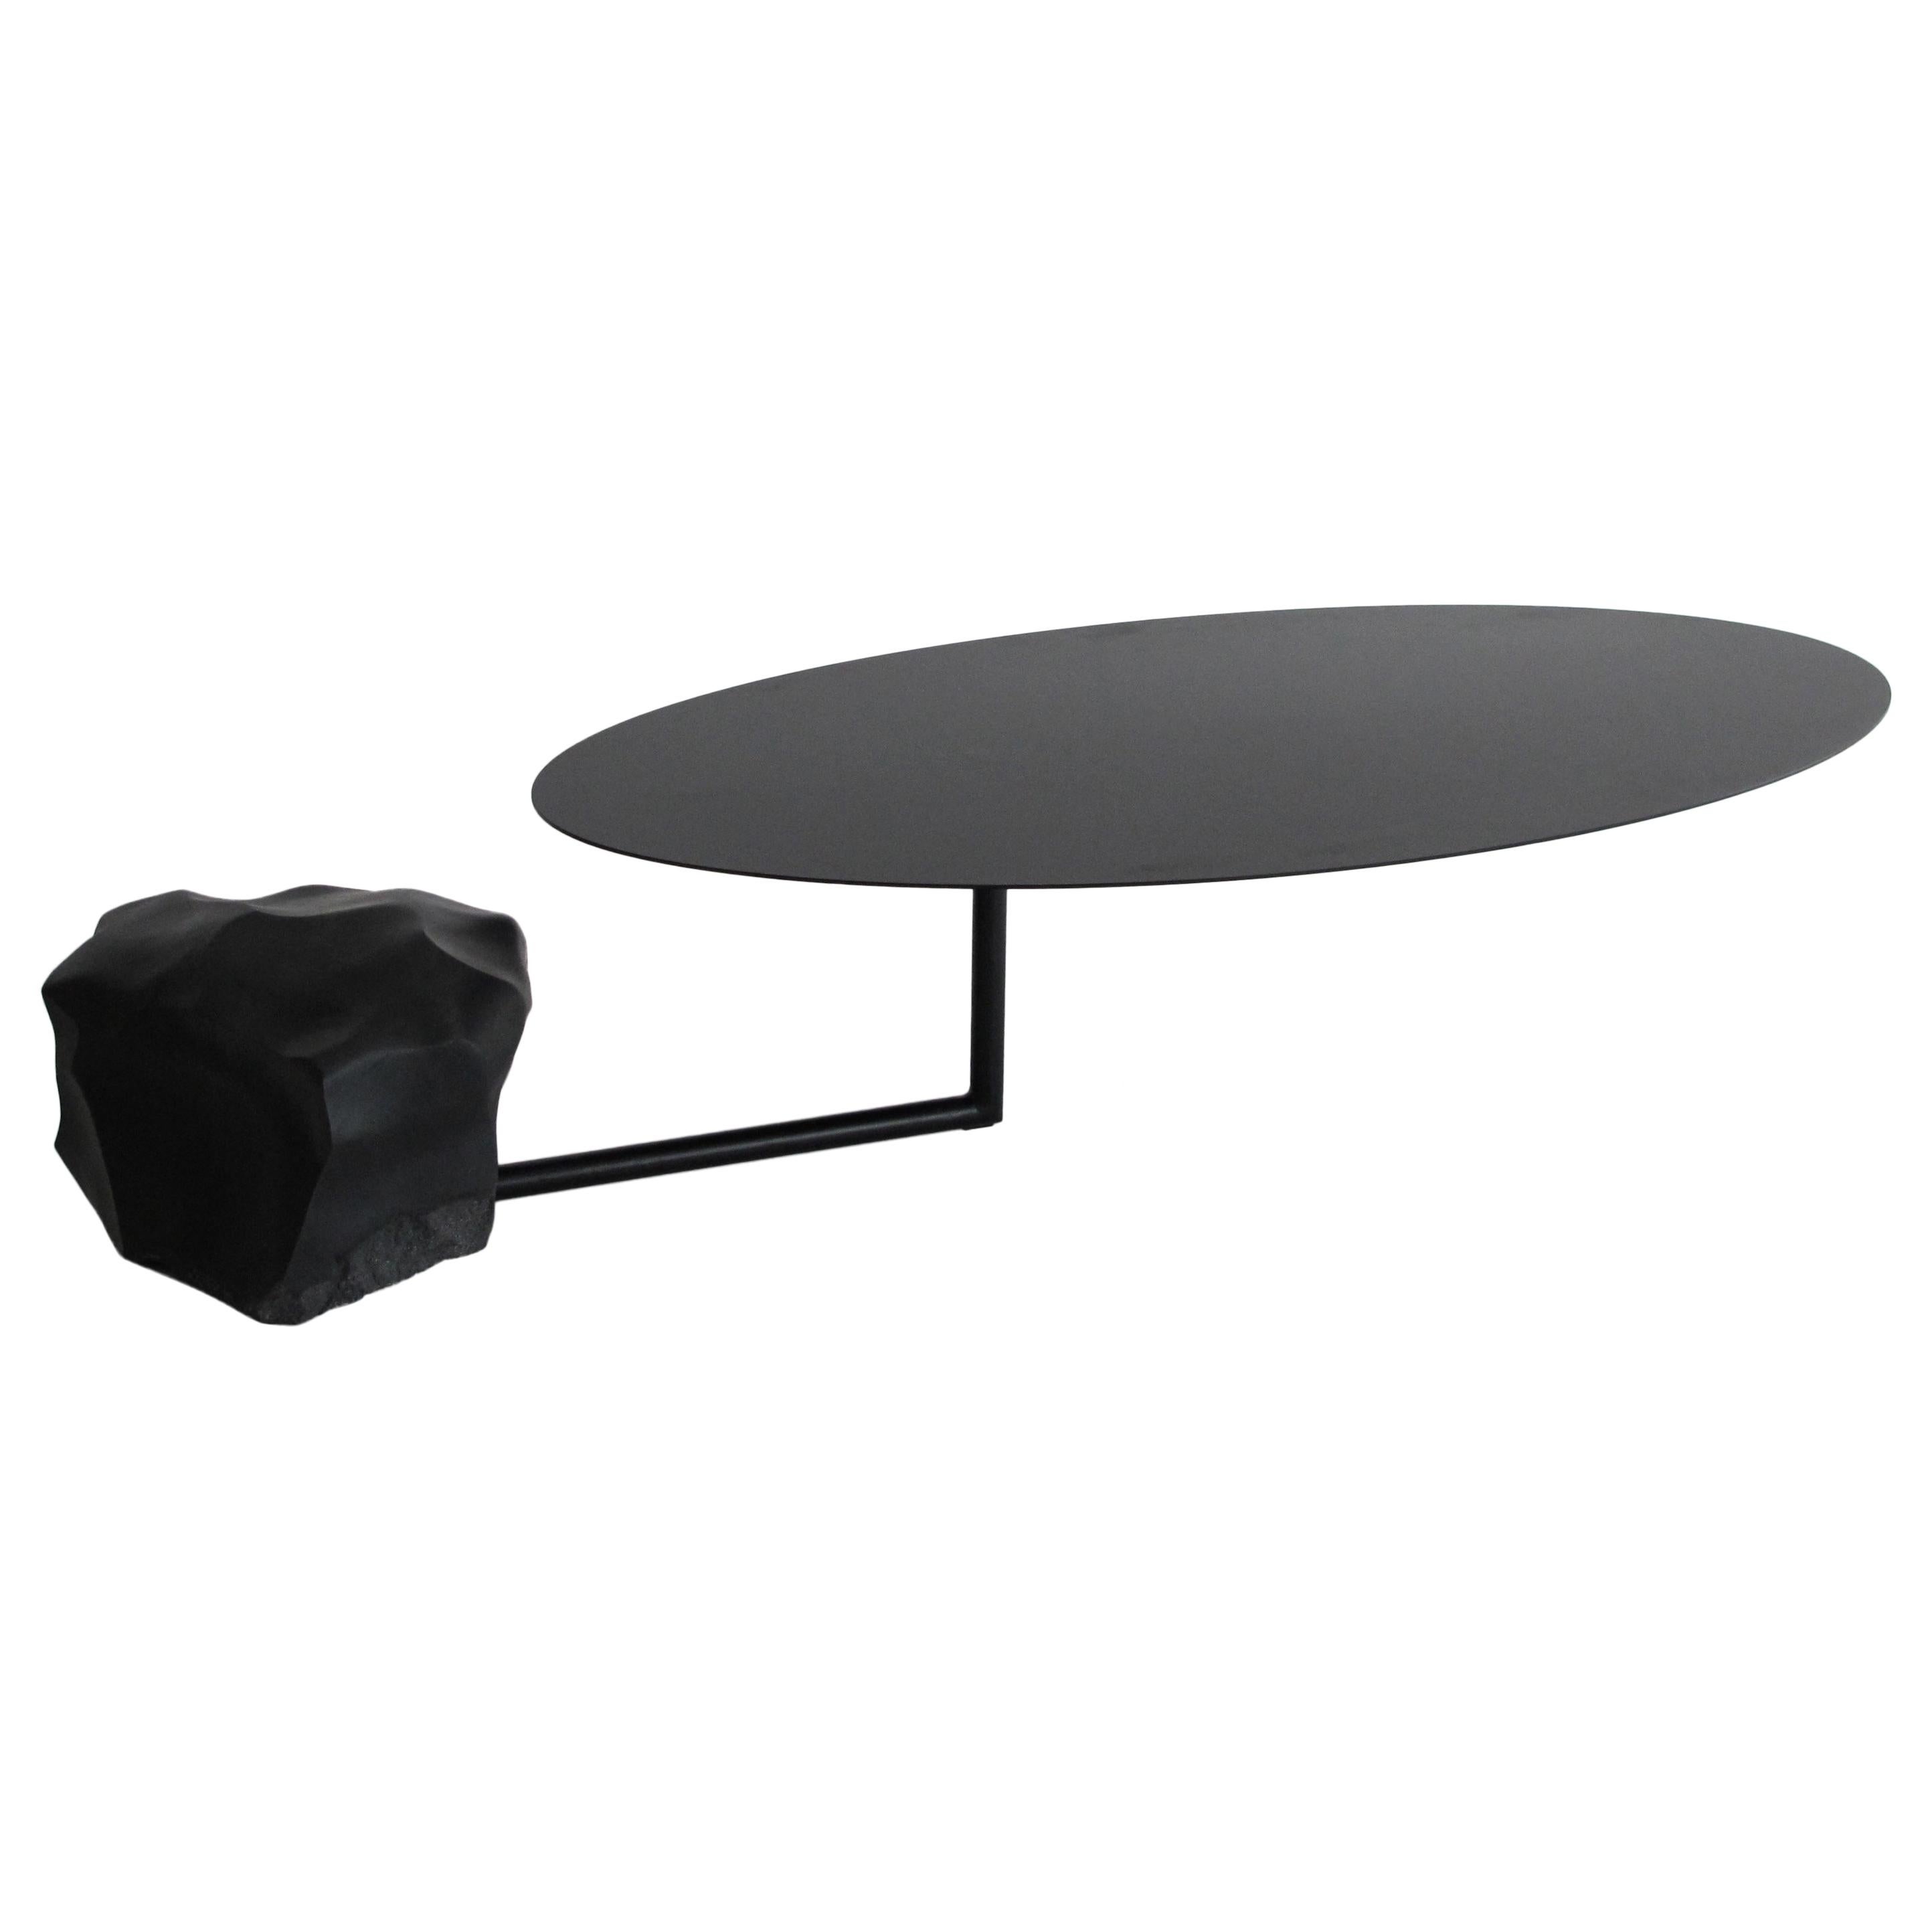 Black Powder Coated Metal Side or Coffee Table Contemporary Design Circular For Sale